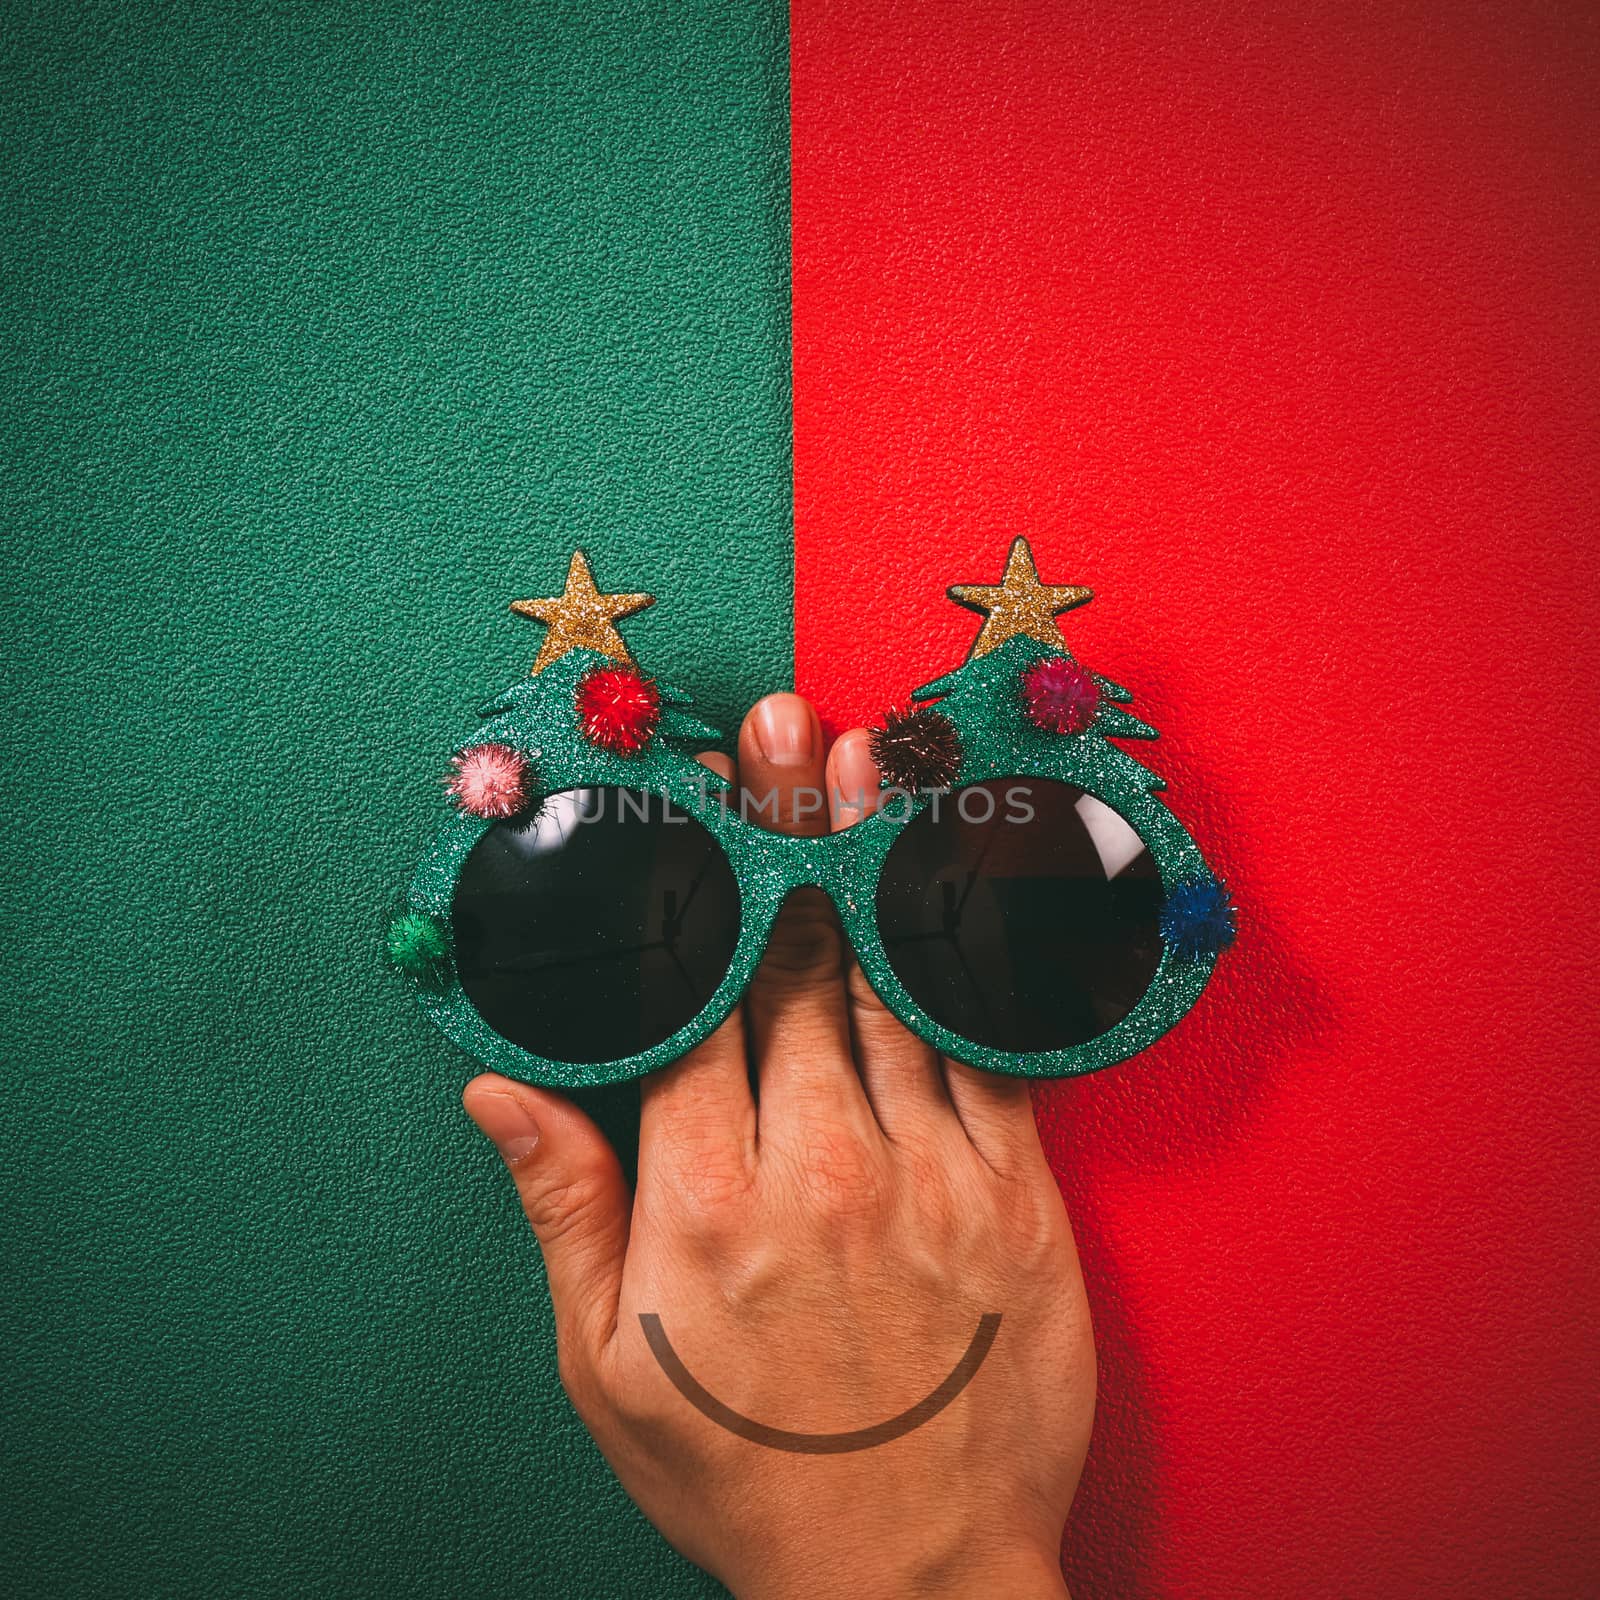 Christmas glasses that decoration with Christmas tree and red ball on hand on green and red  background